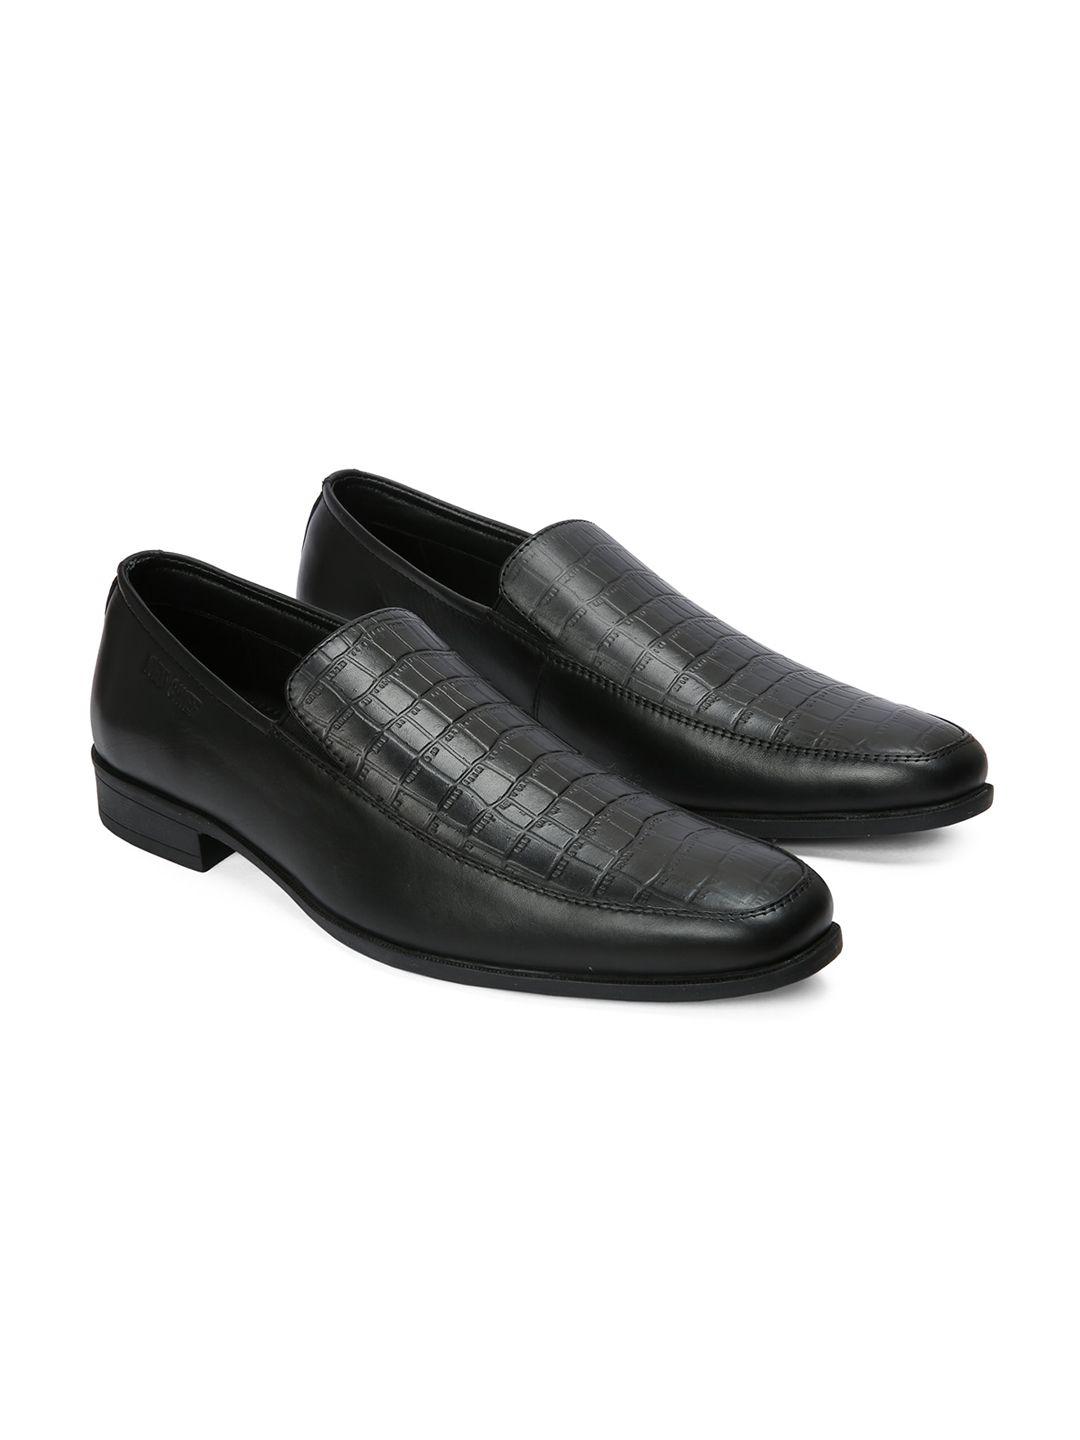 red-chief-men-black-textured-leather-slip-on-formal-shoe